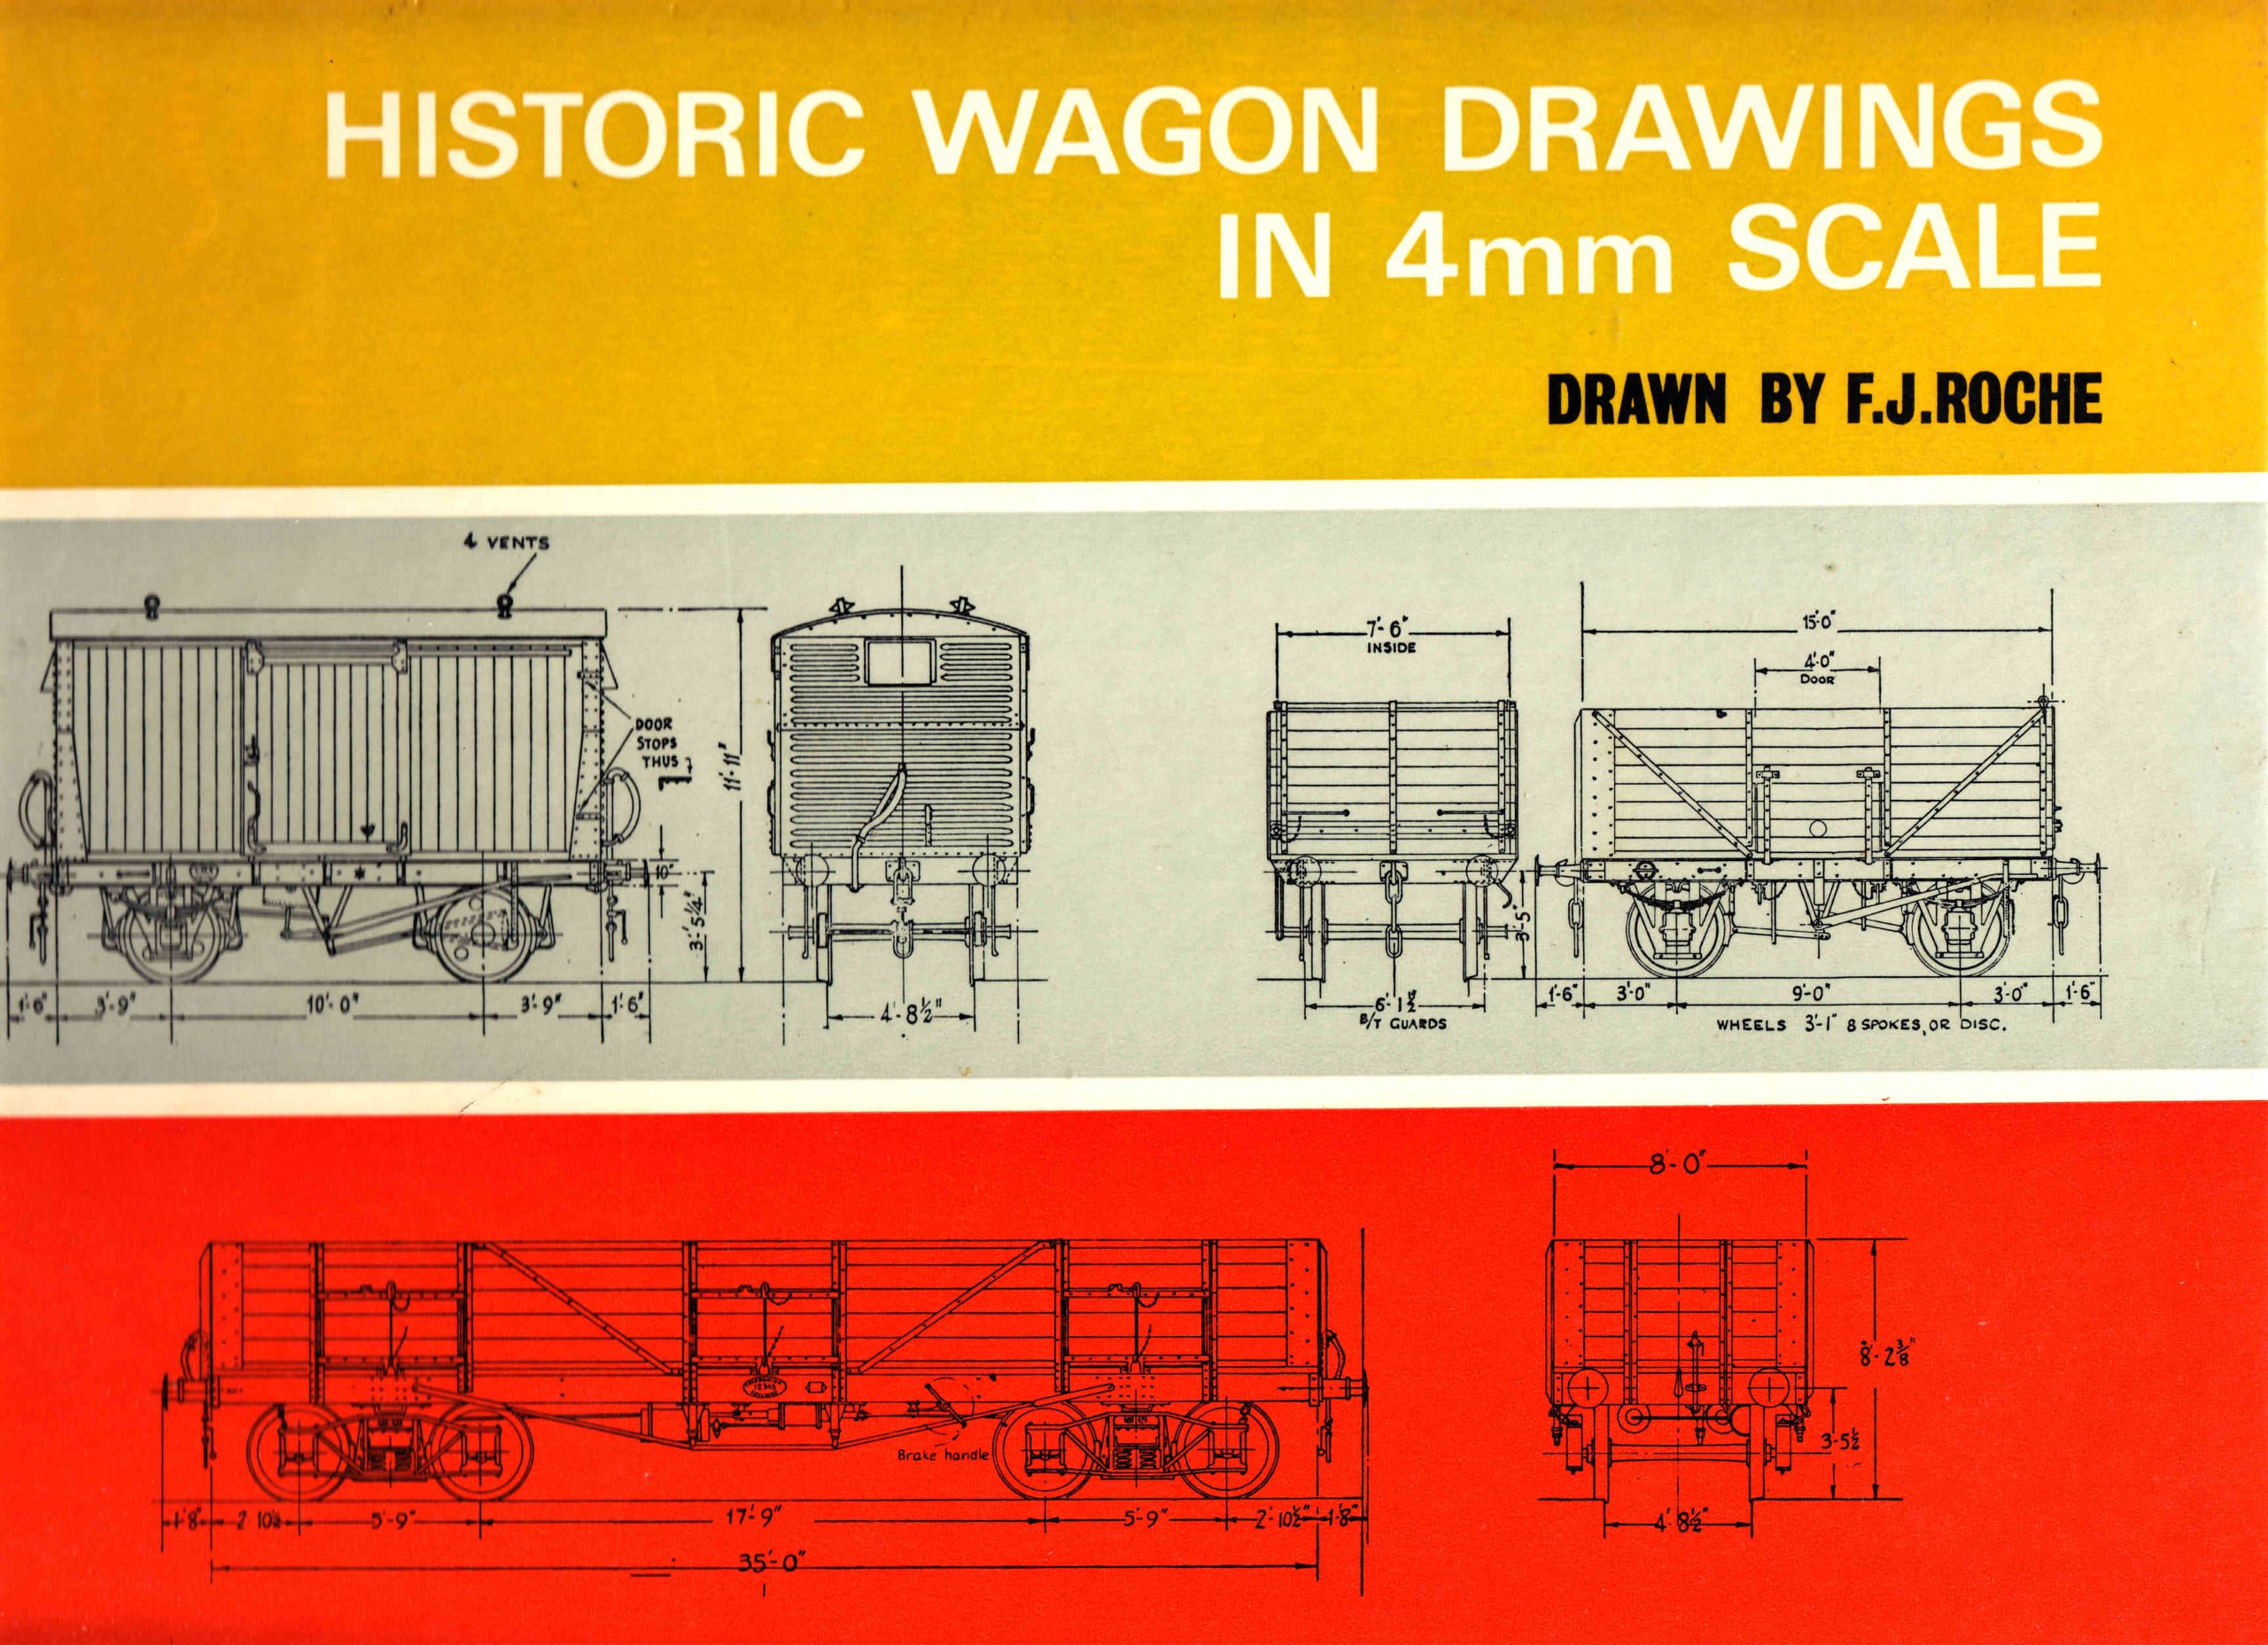 Historic Wagon Drawings in 4mm Scale